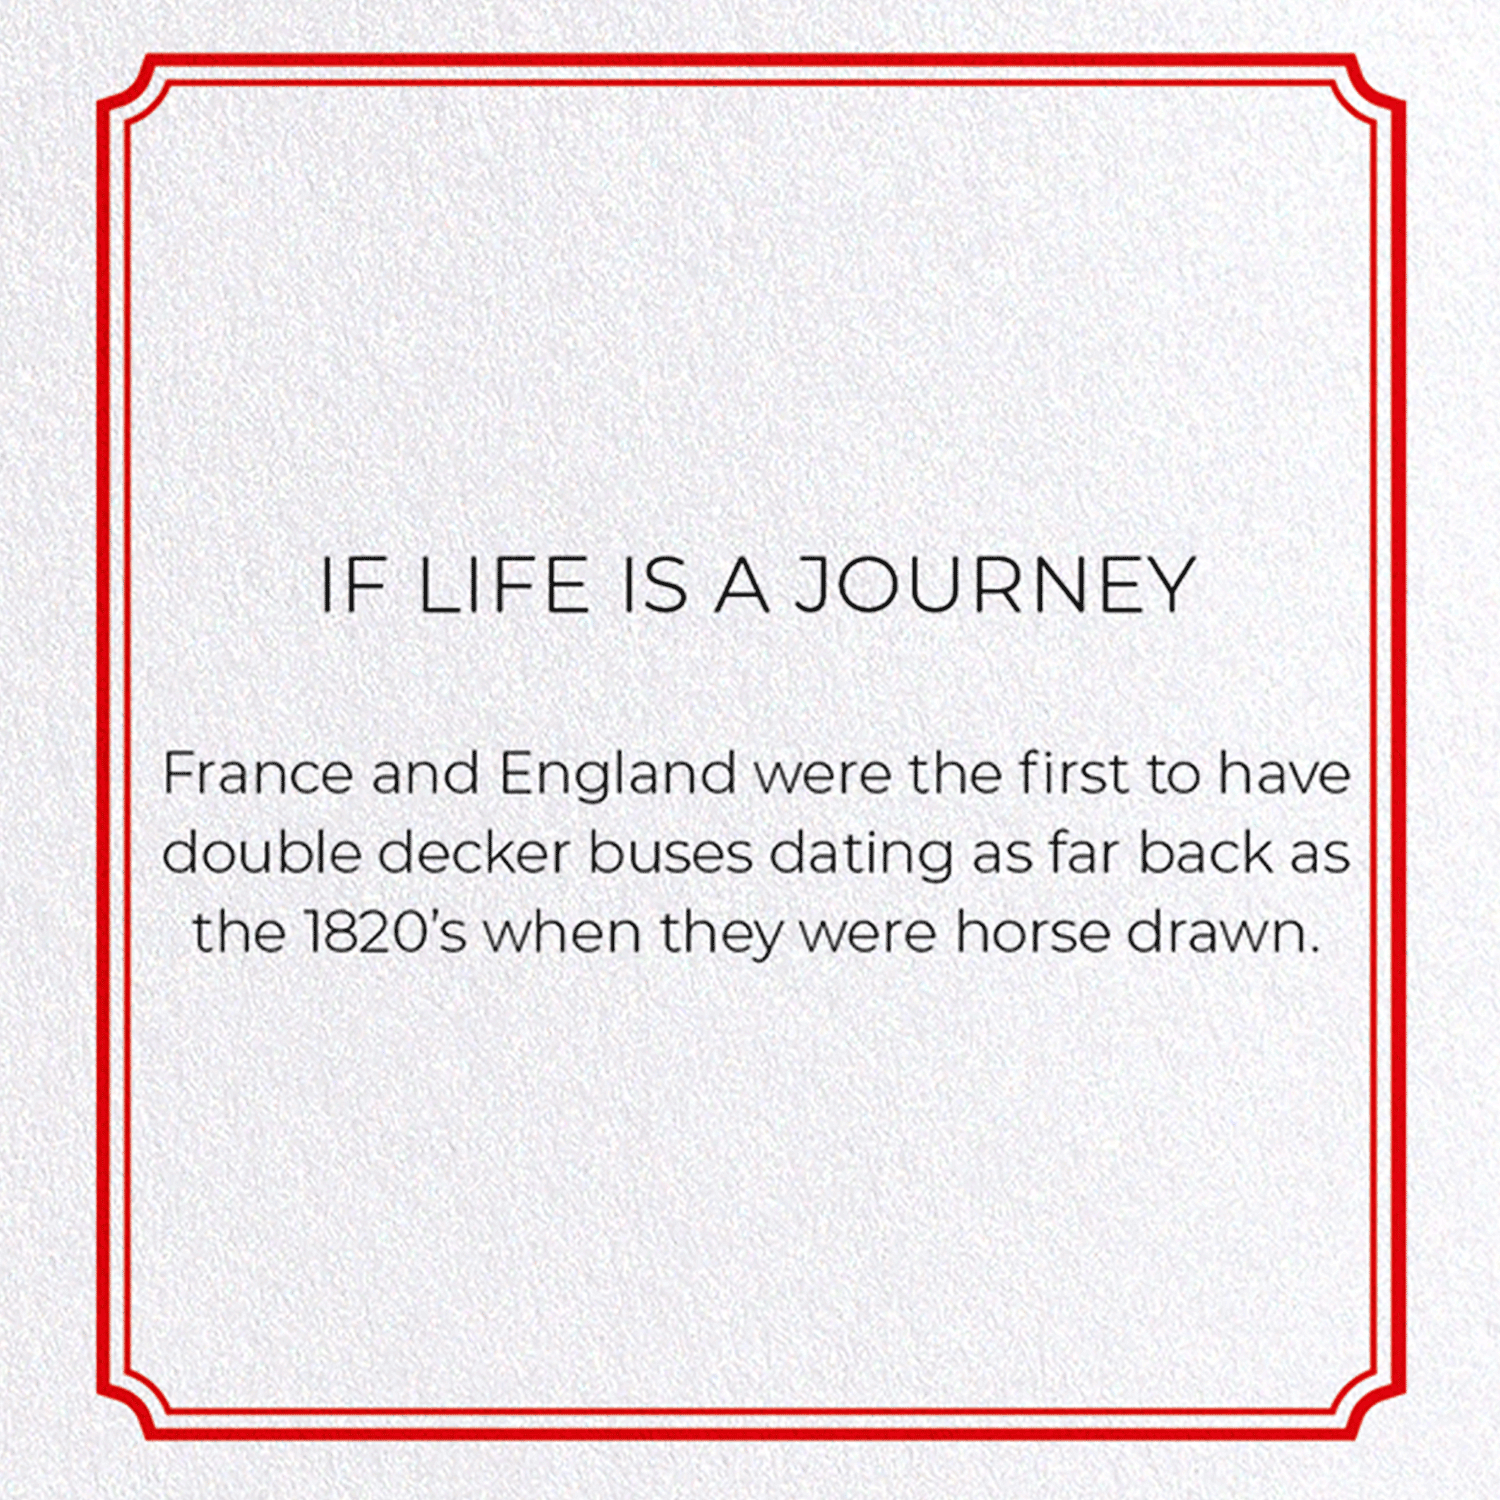 IF LIFE IS A JOURNEY